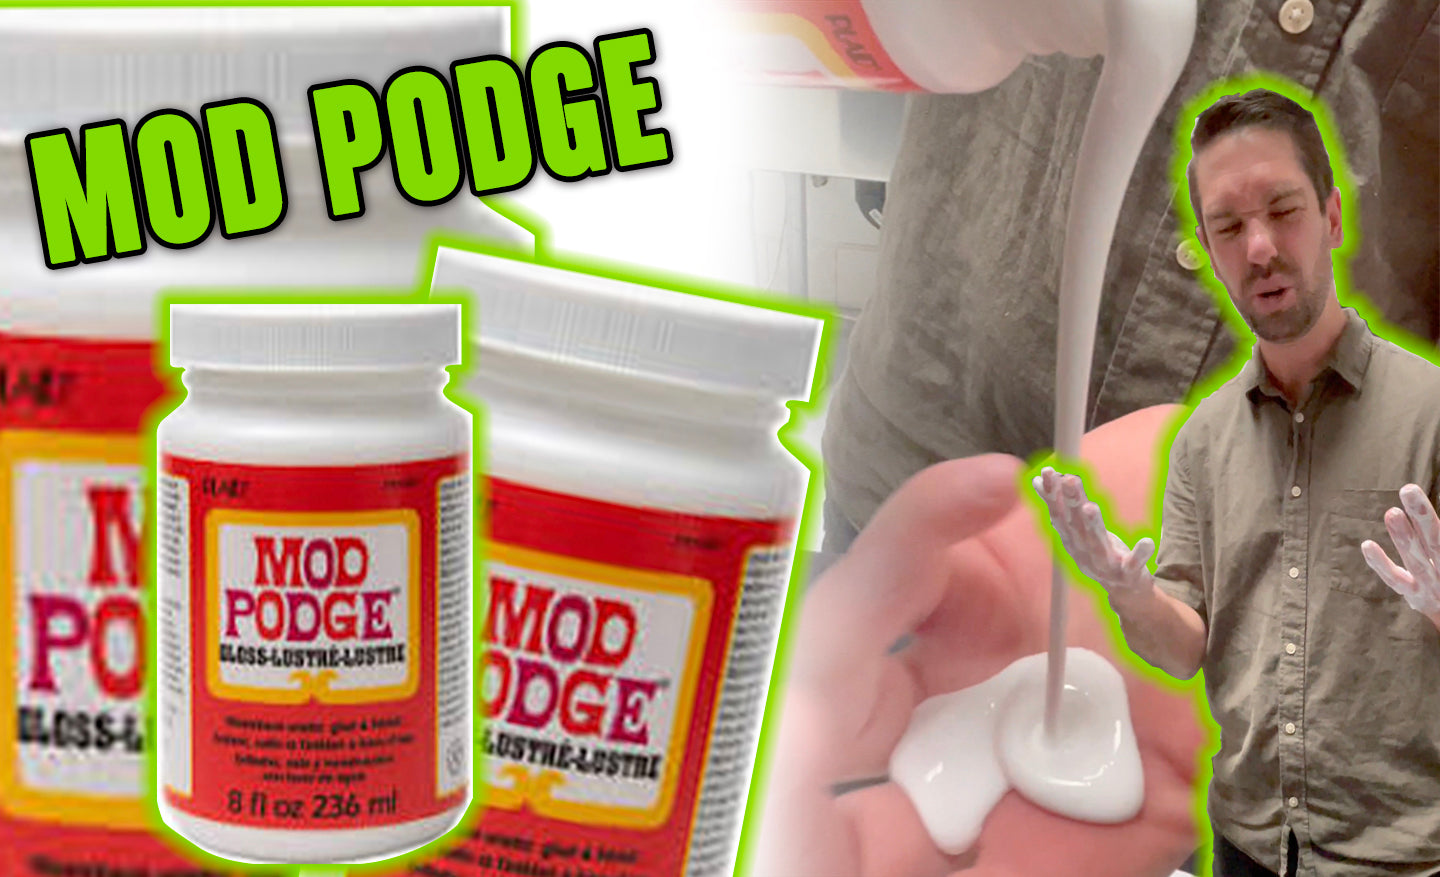 How To Remove Mod Podge & How To Get Mod Podge Off - Grip Clean